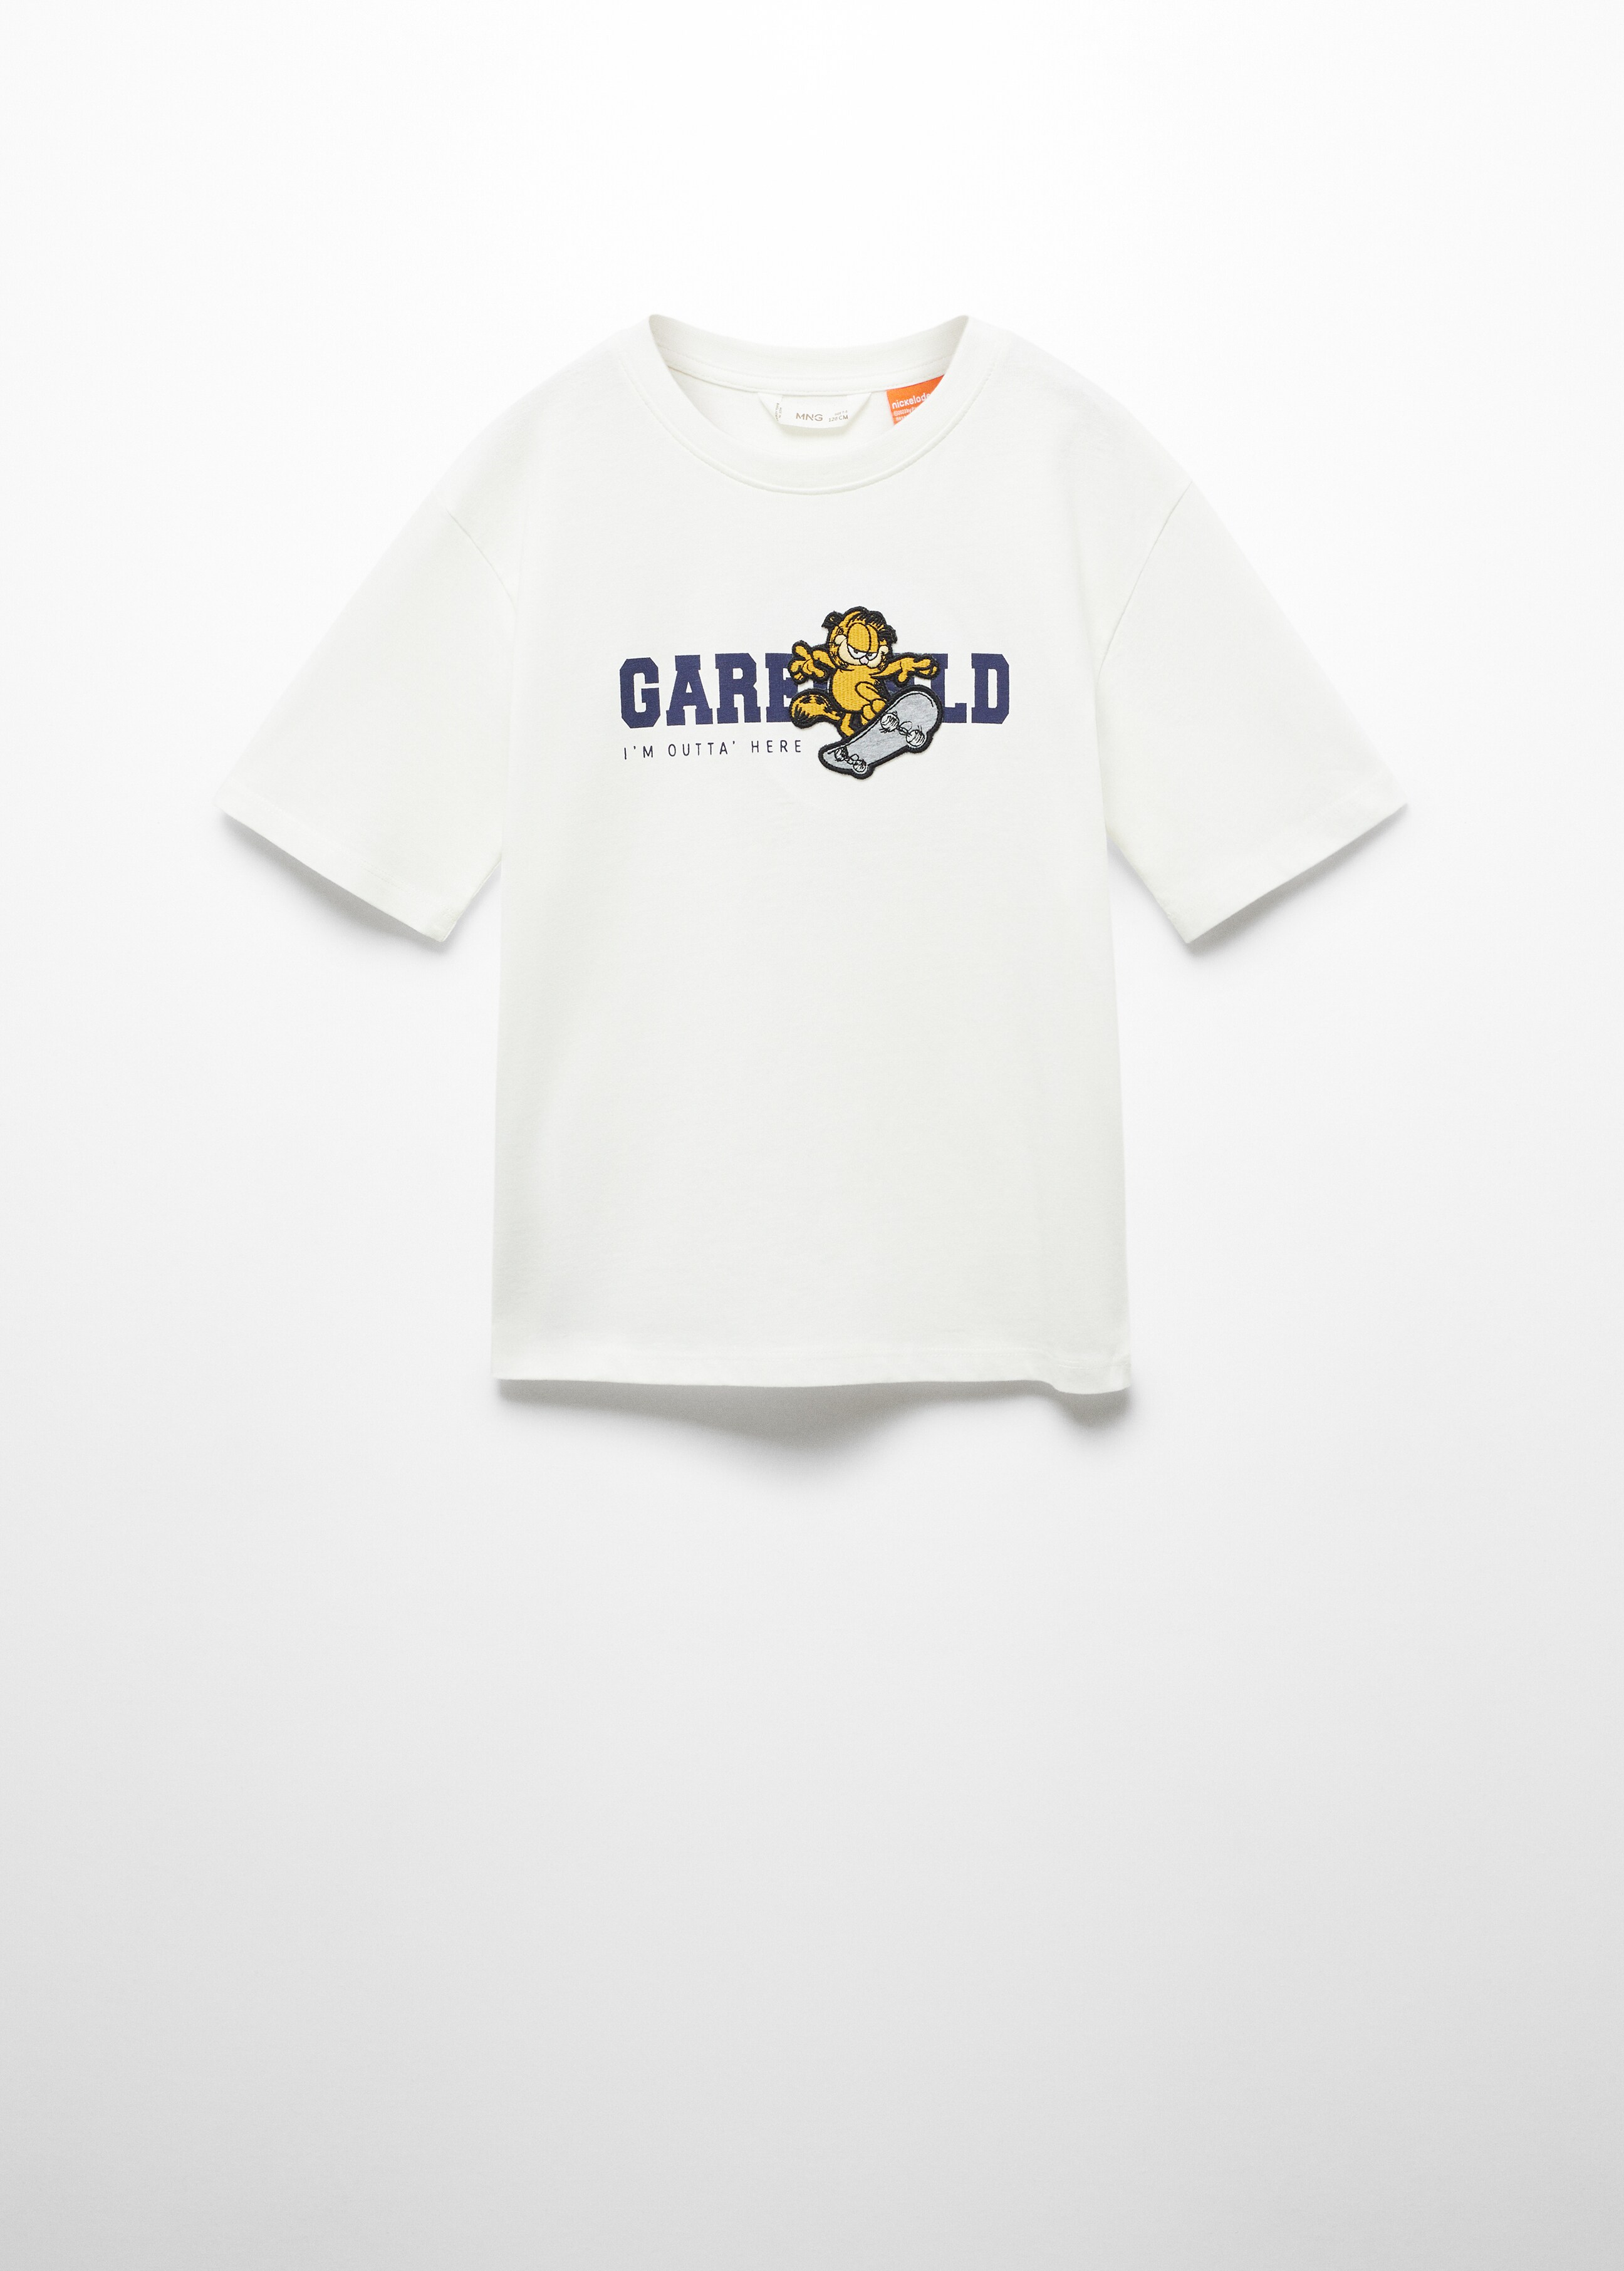 Garfield cotton T-shirt - Article without model